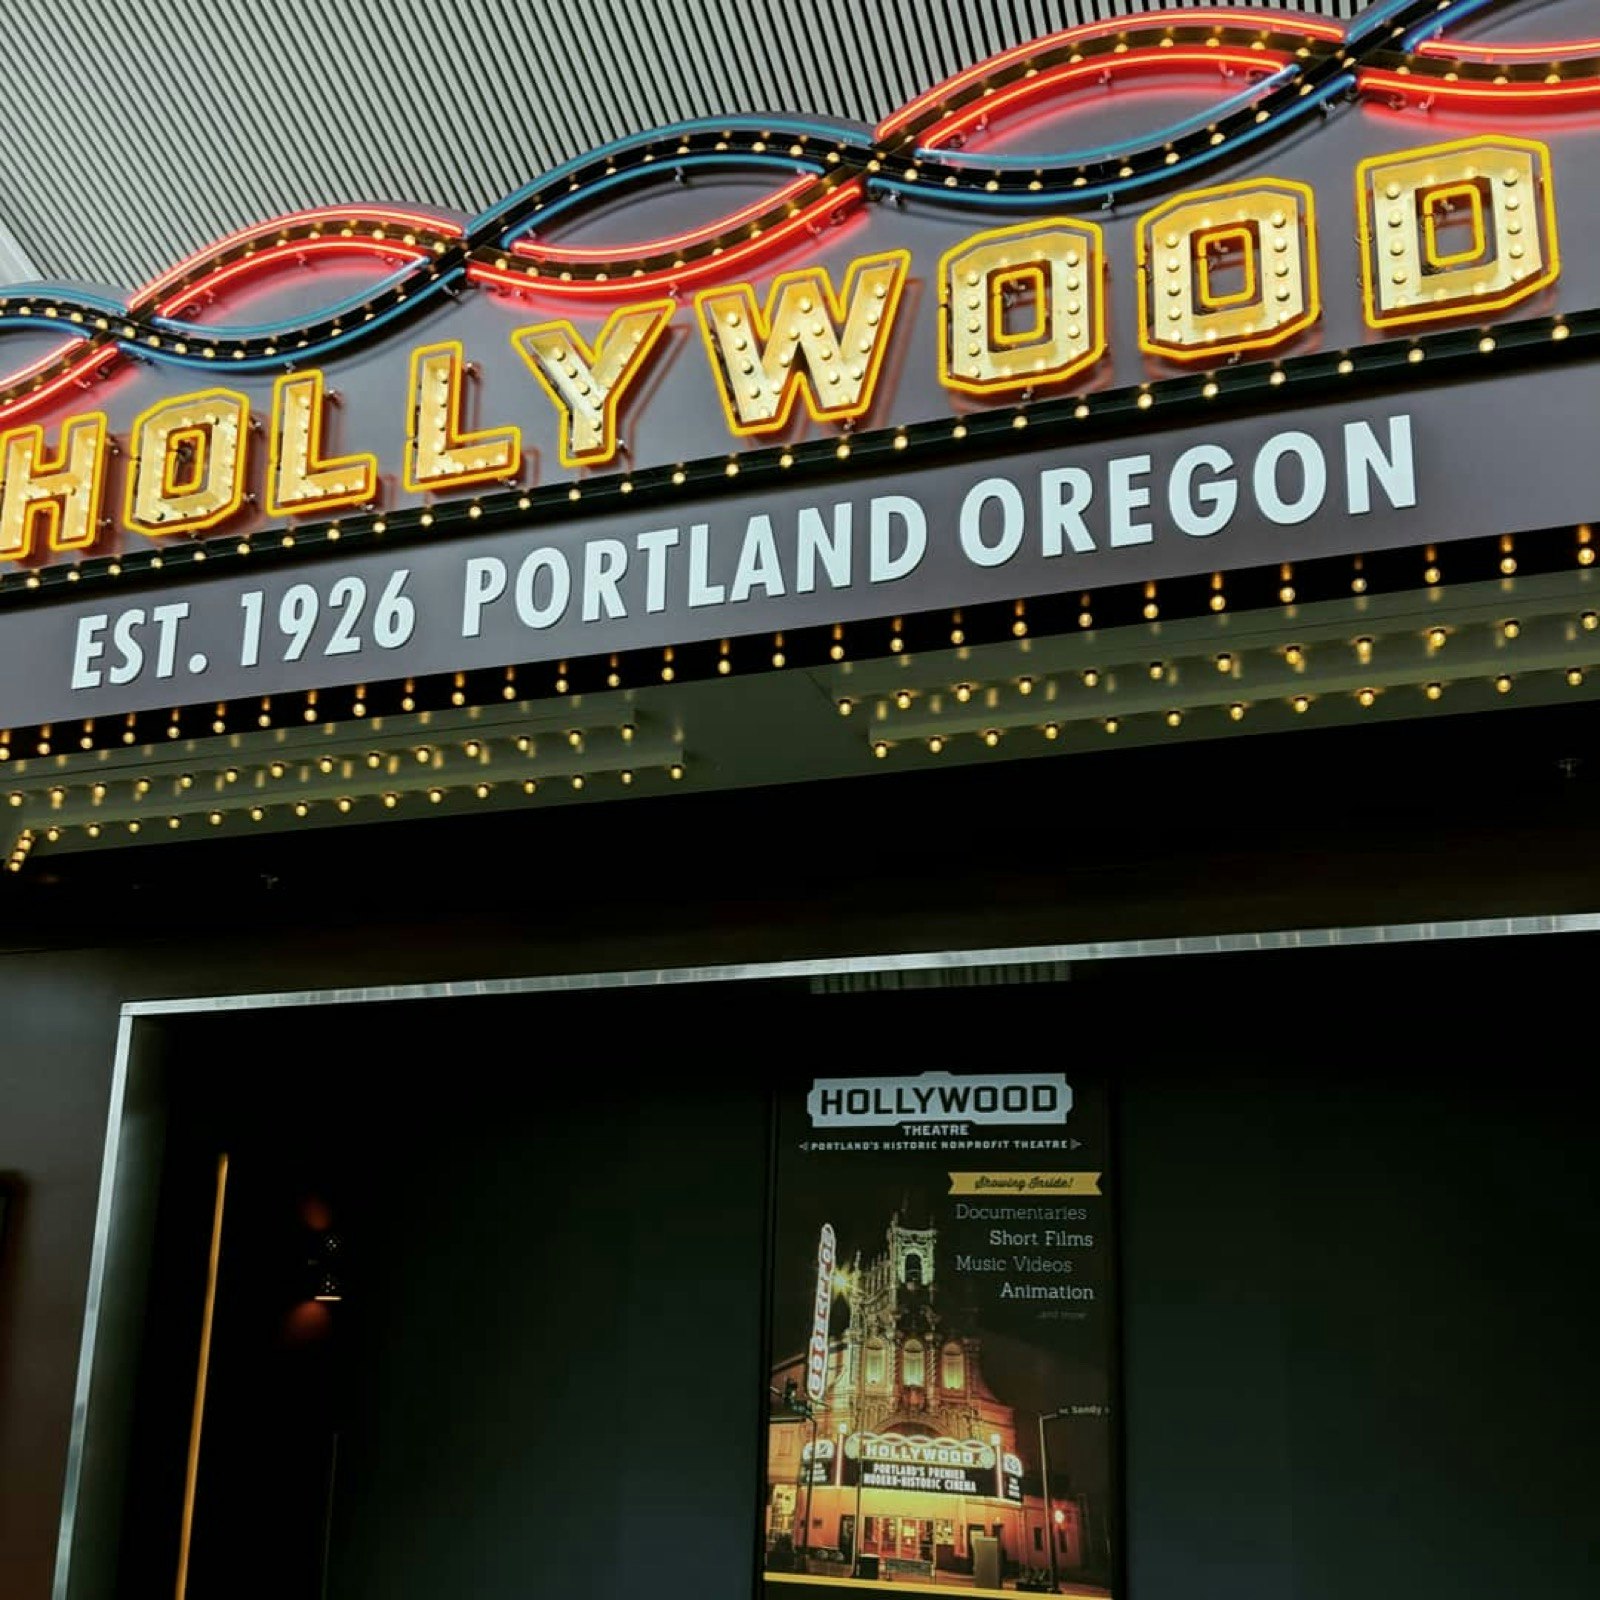 The front of a movie theater inside the Portland International Airport, or PDX, is shown. It's got a yellow marquee that spells Hollywood